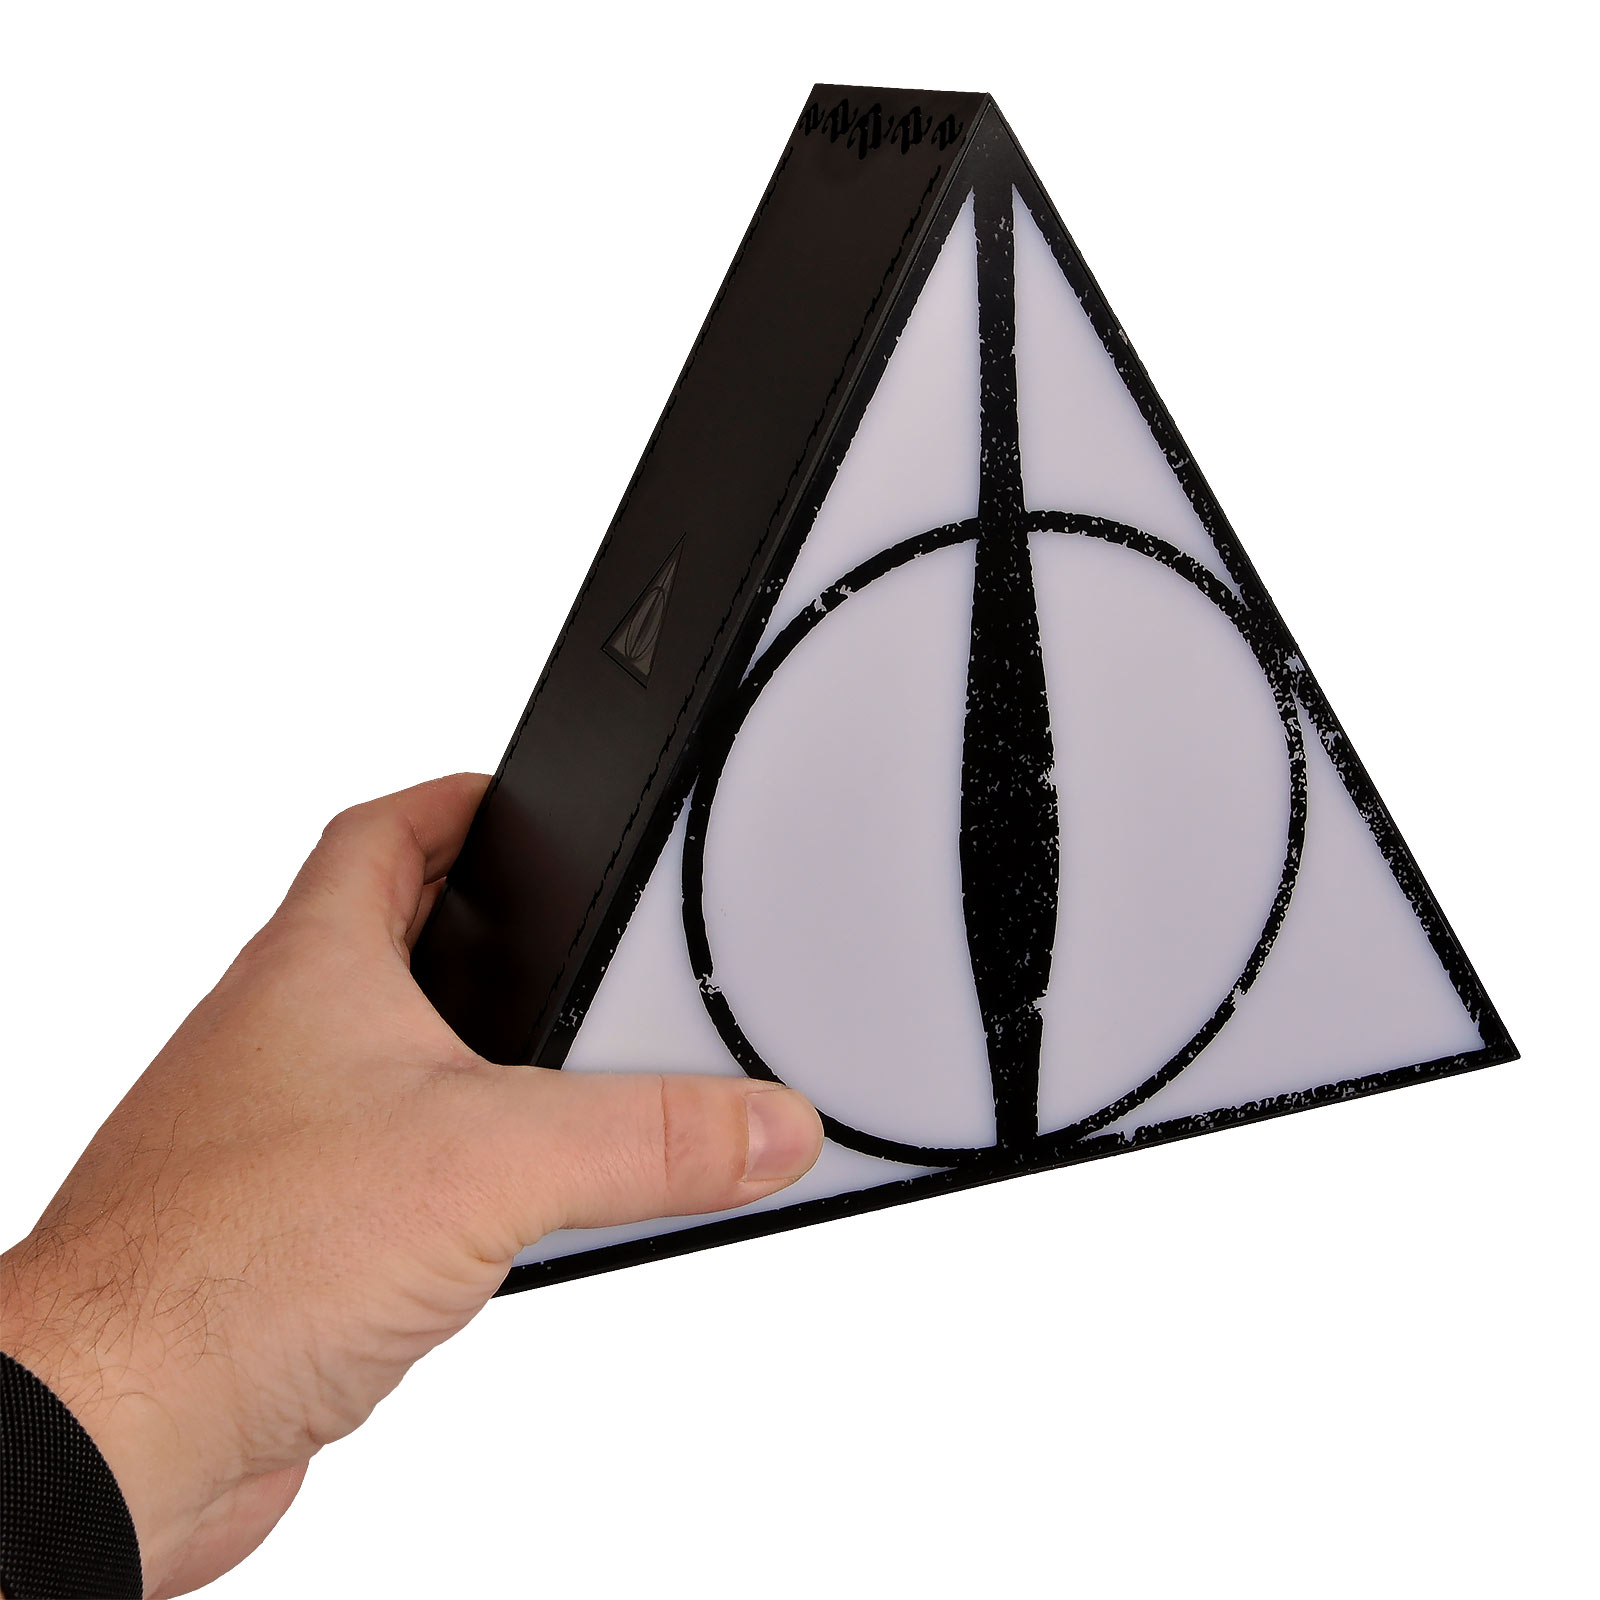 Harry Potter - Deathly Hallows Lamp with Projection